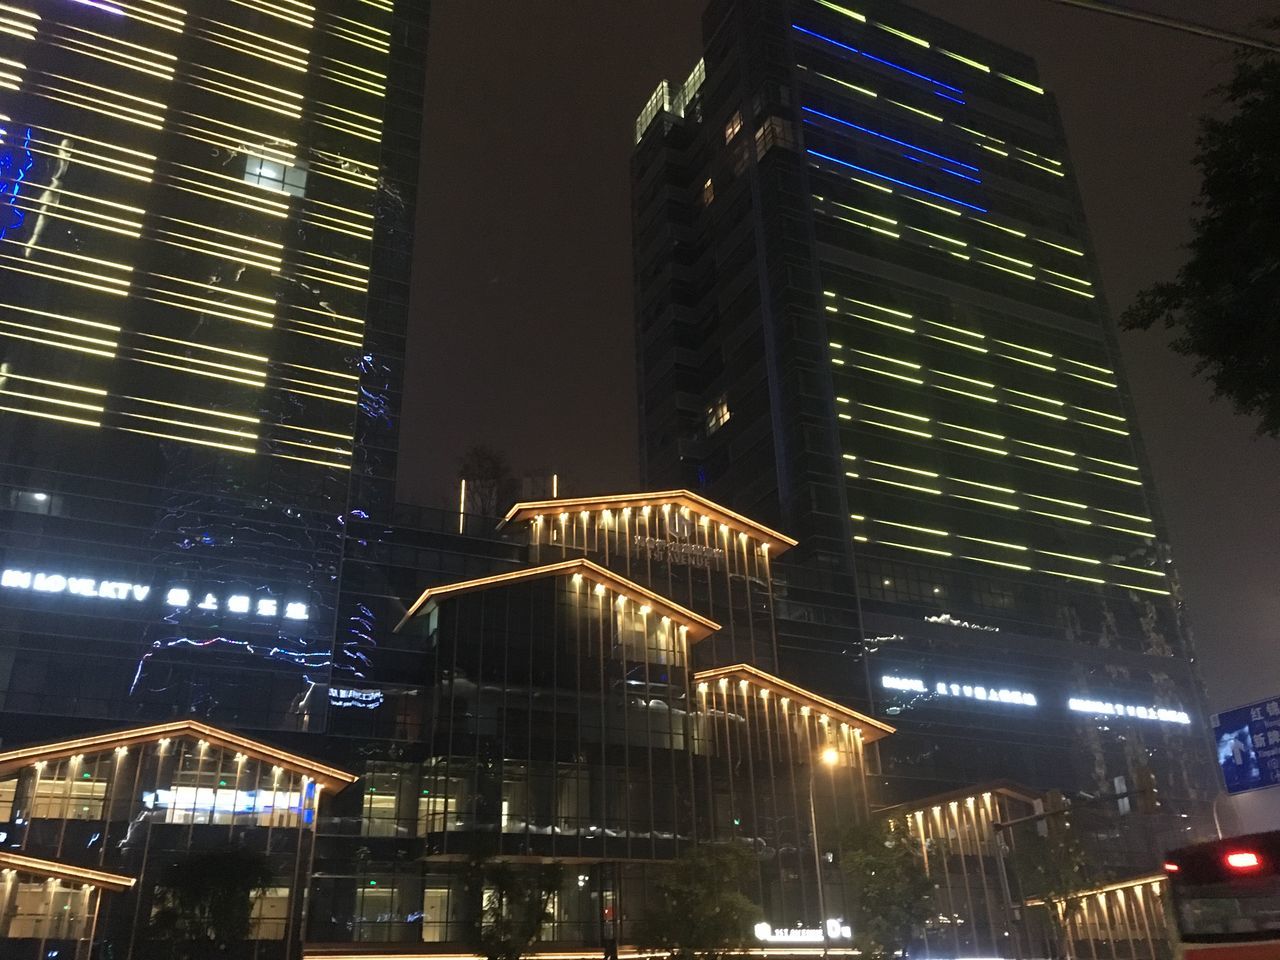 illuminated, architecture, built structure, building exterior, night, city, building, low angle view, office building exterior, office, modern, tall - high, skyscraper, no people, outdoors, tower, lighting equipment, nature, glowing, city life, financial district